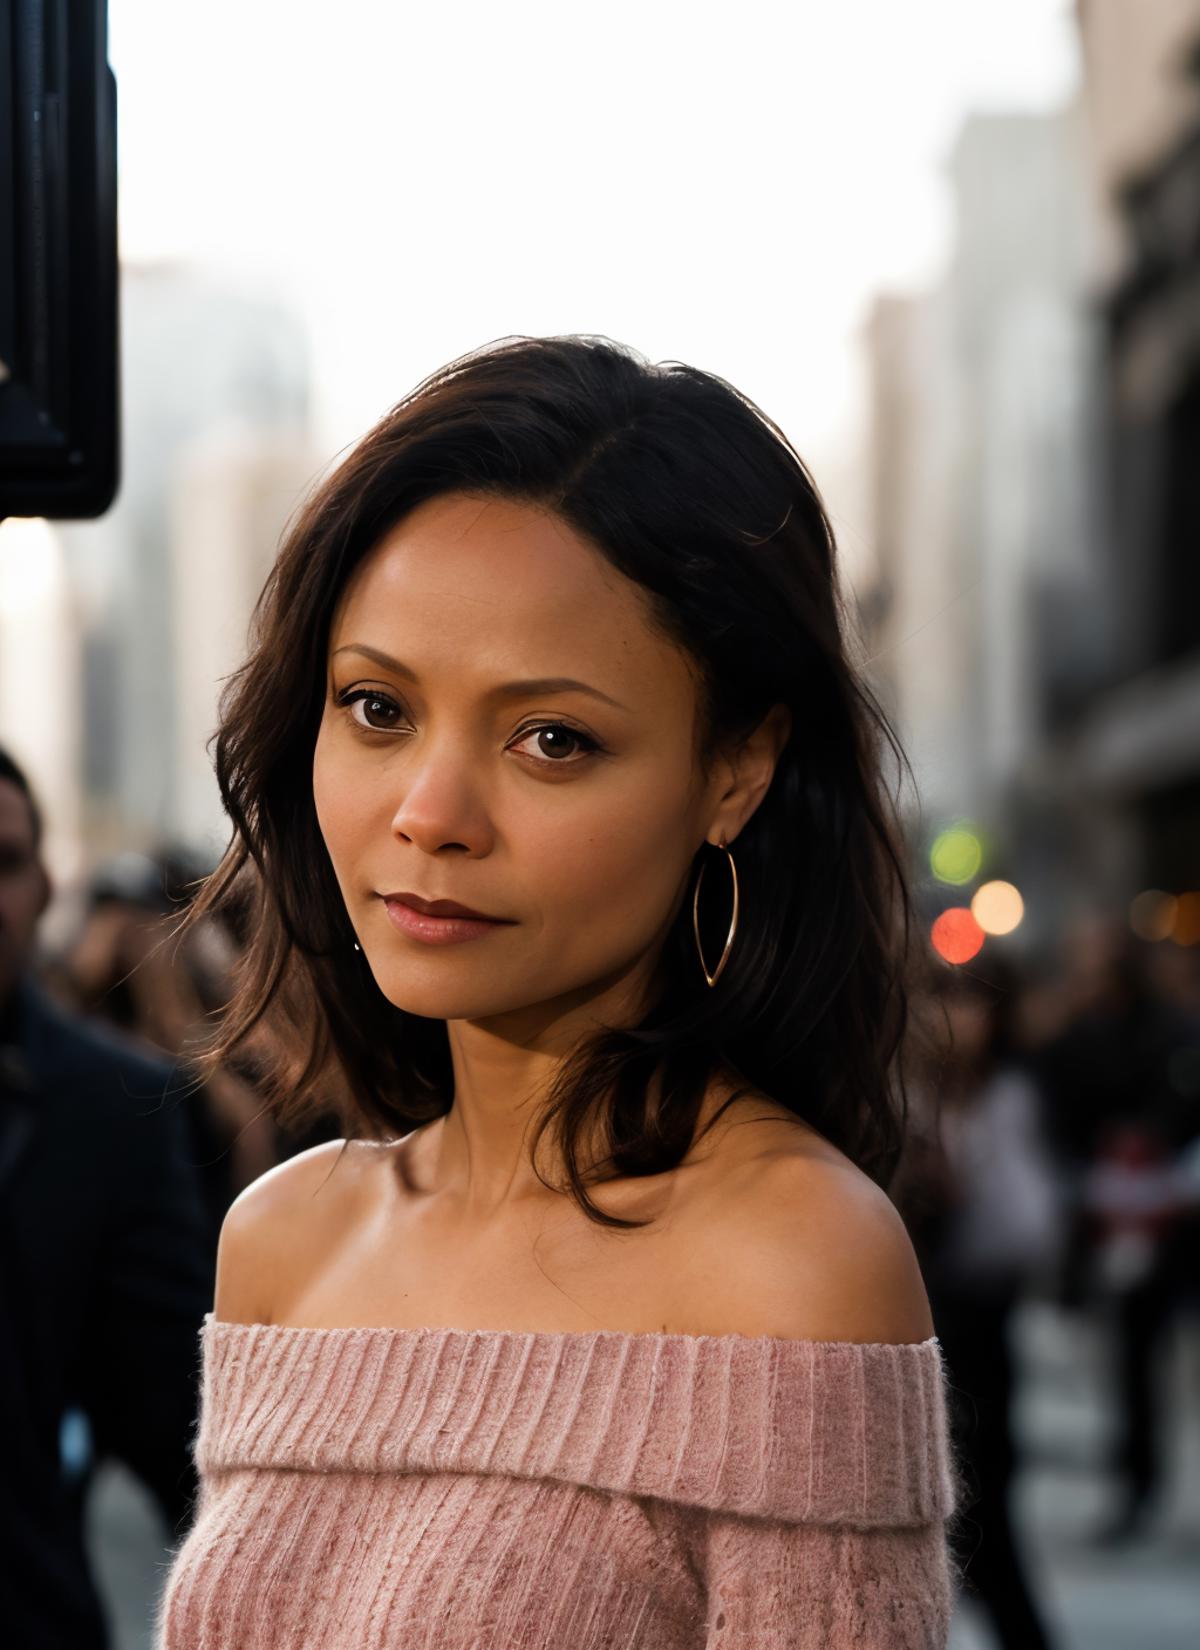 Thandie Newton (from Mission: Impossible 2) image by astragartist